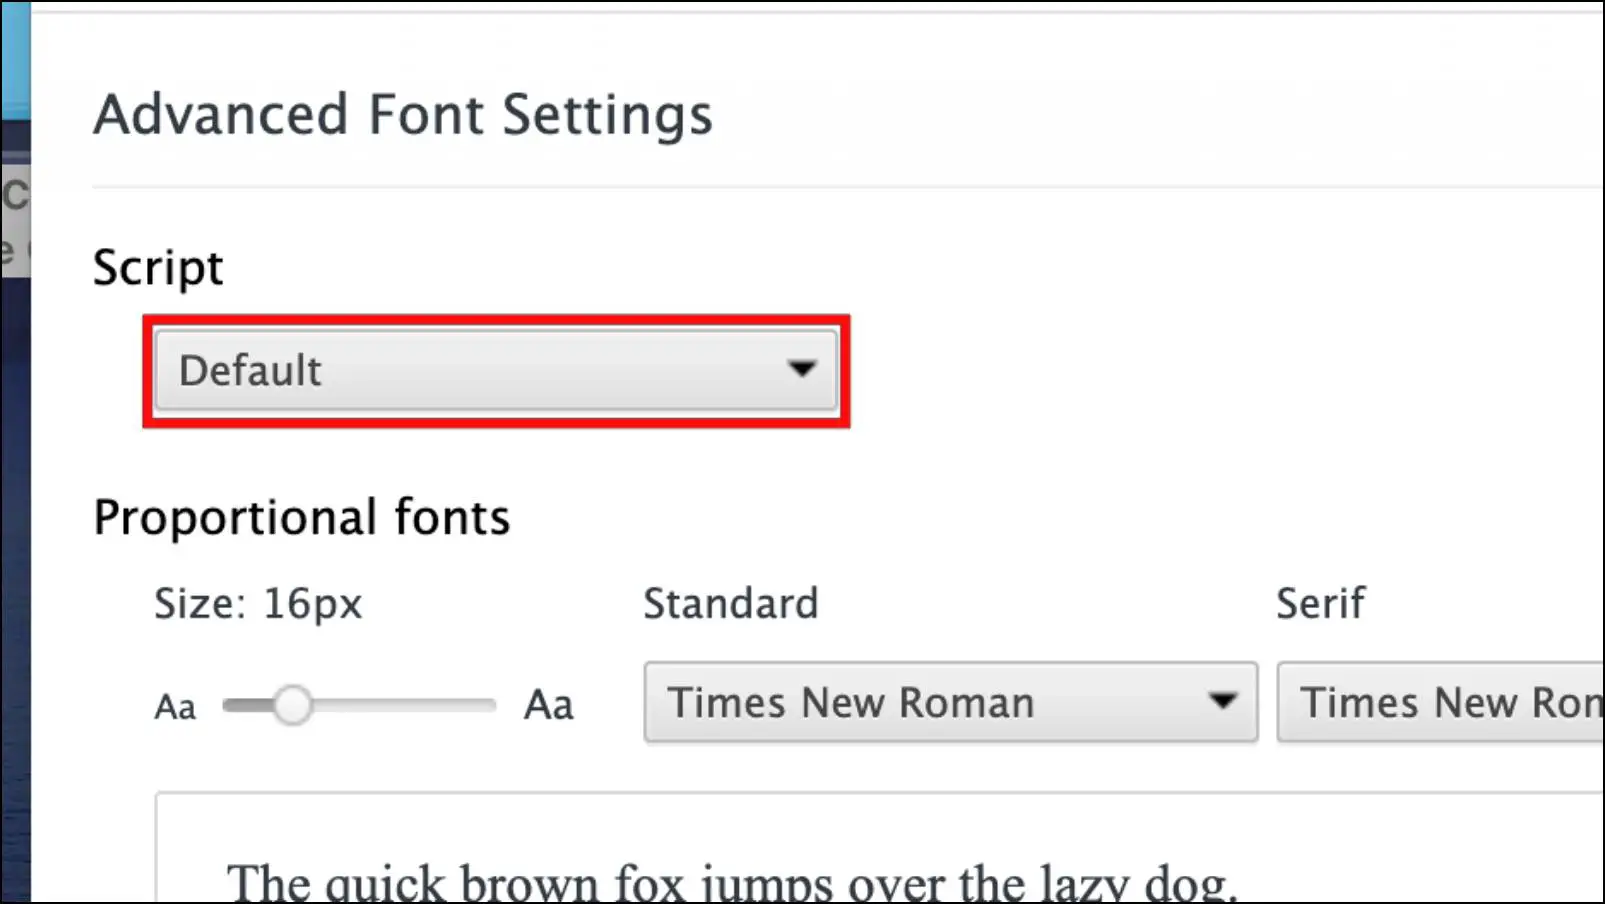 Choose Language to Change the Font For